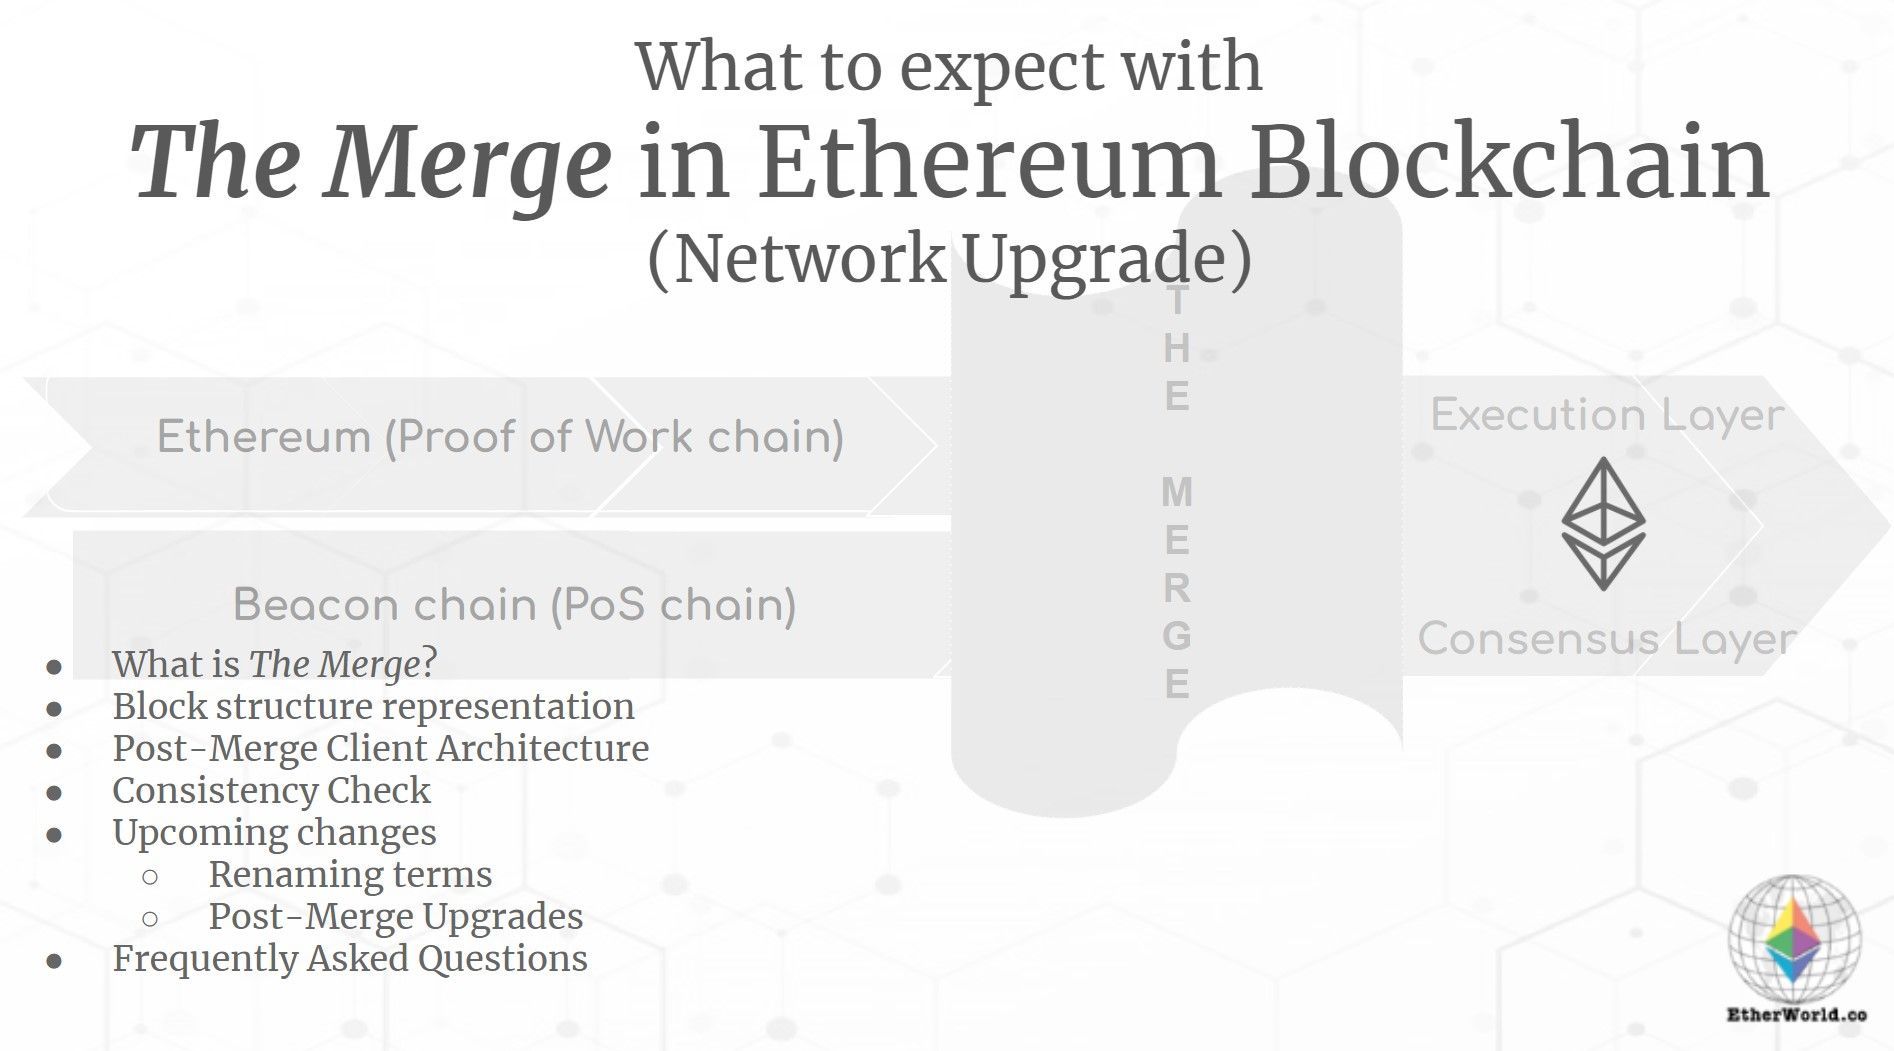 An overview of expected changes with the Ethereum Merge upgrade